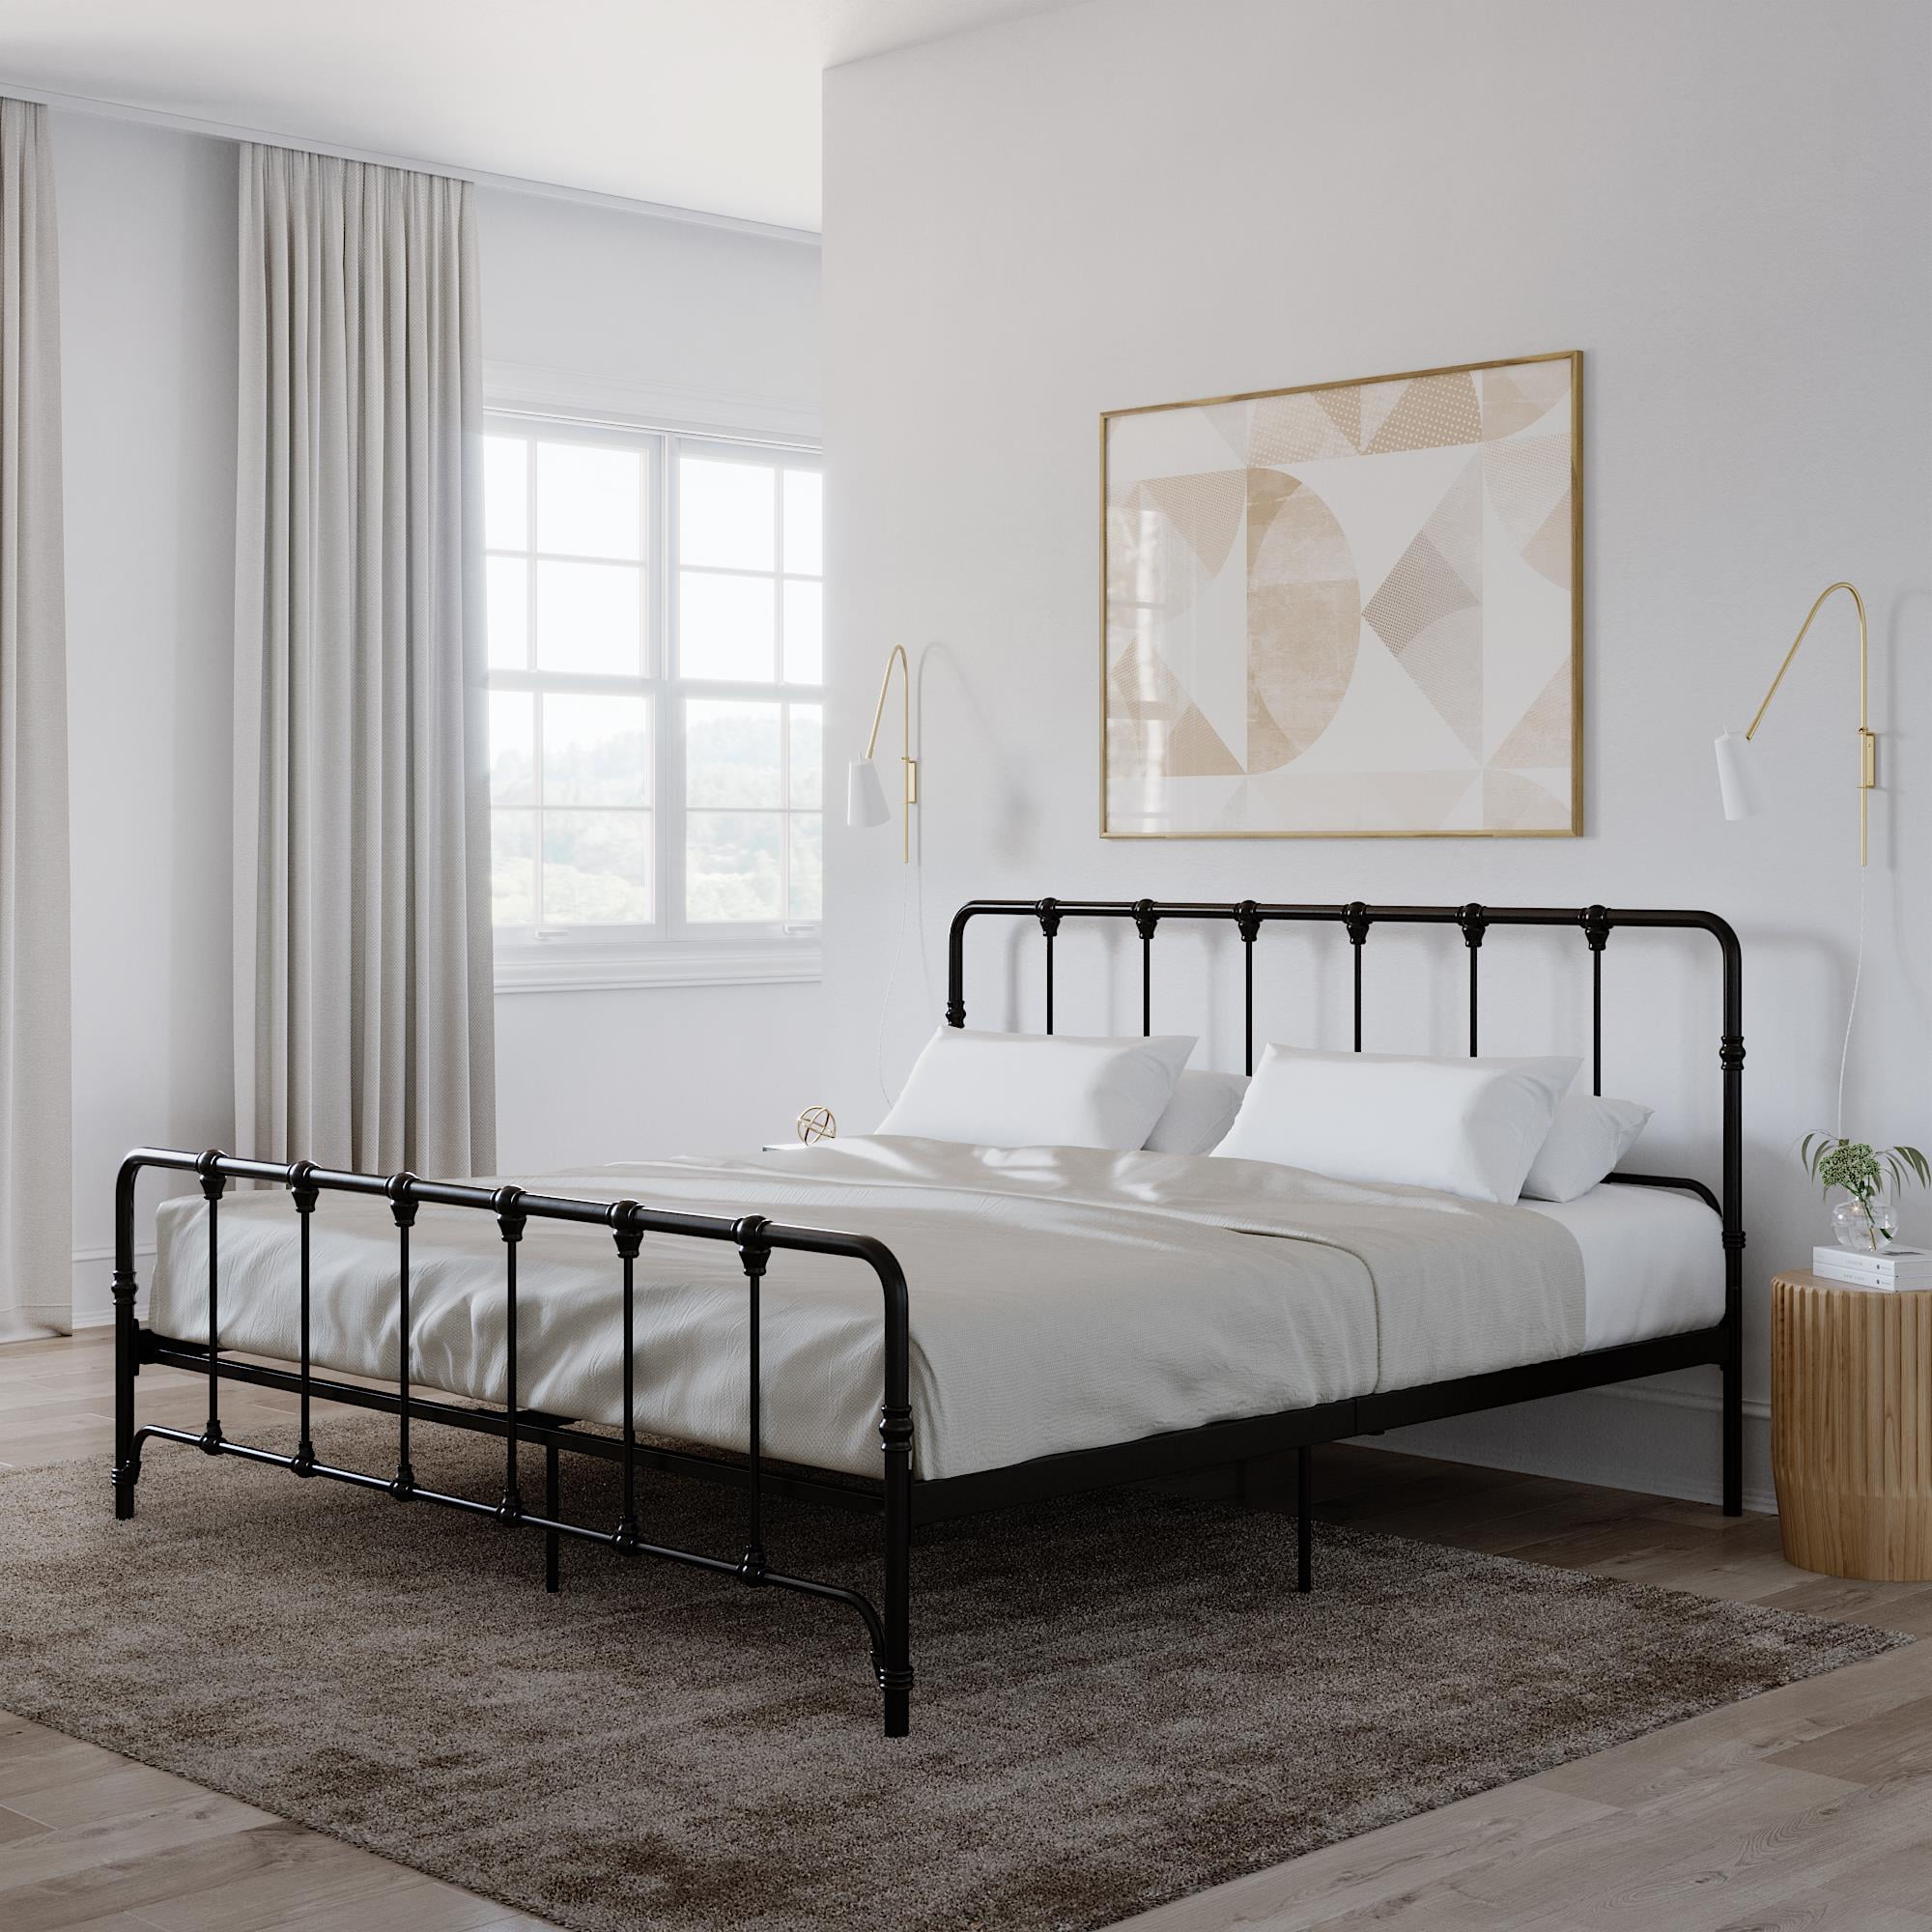 Mainstays Farmhouse Metal Bed King, All In One King Bed